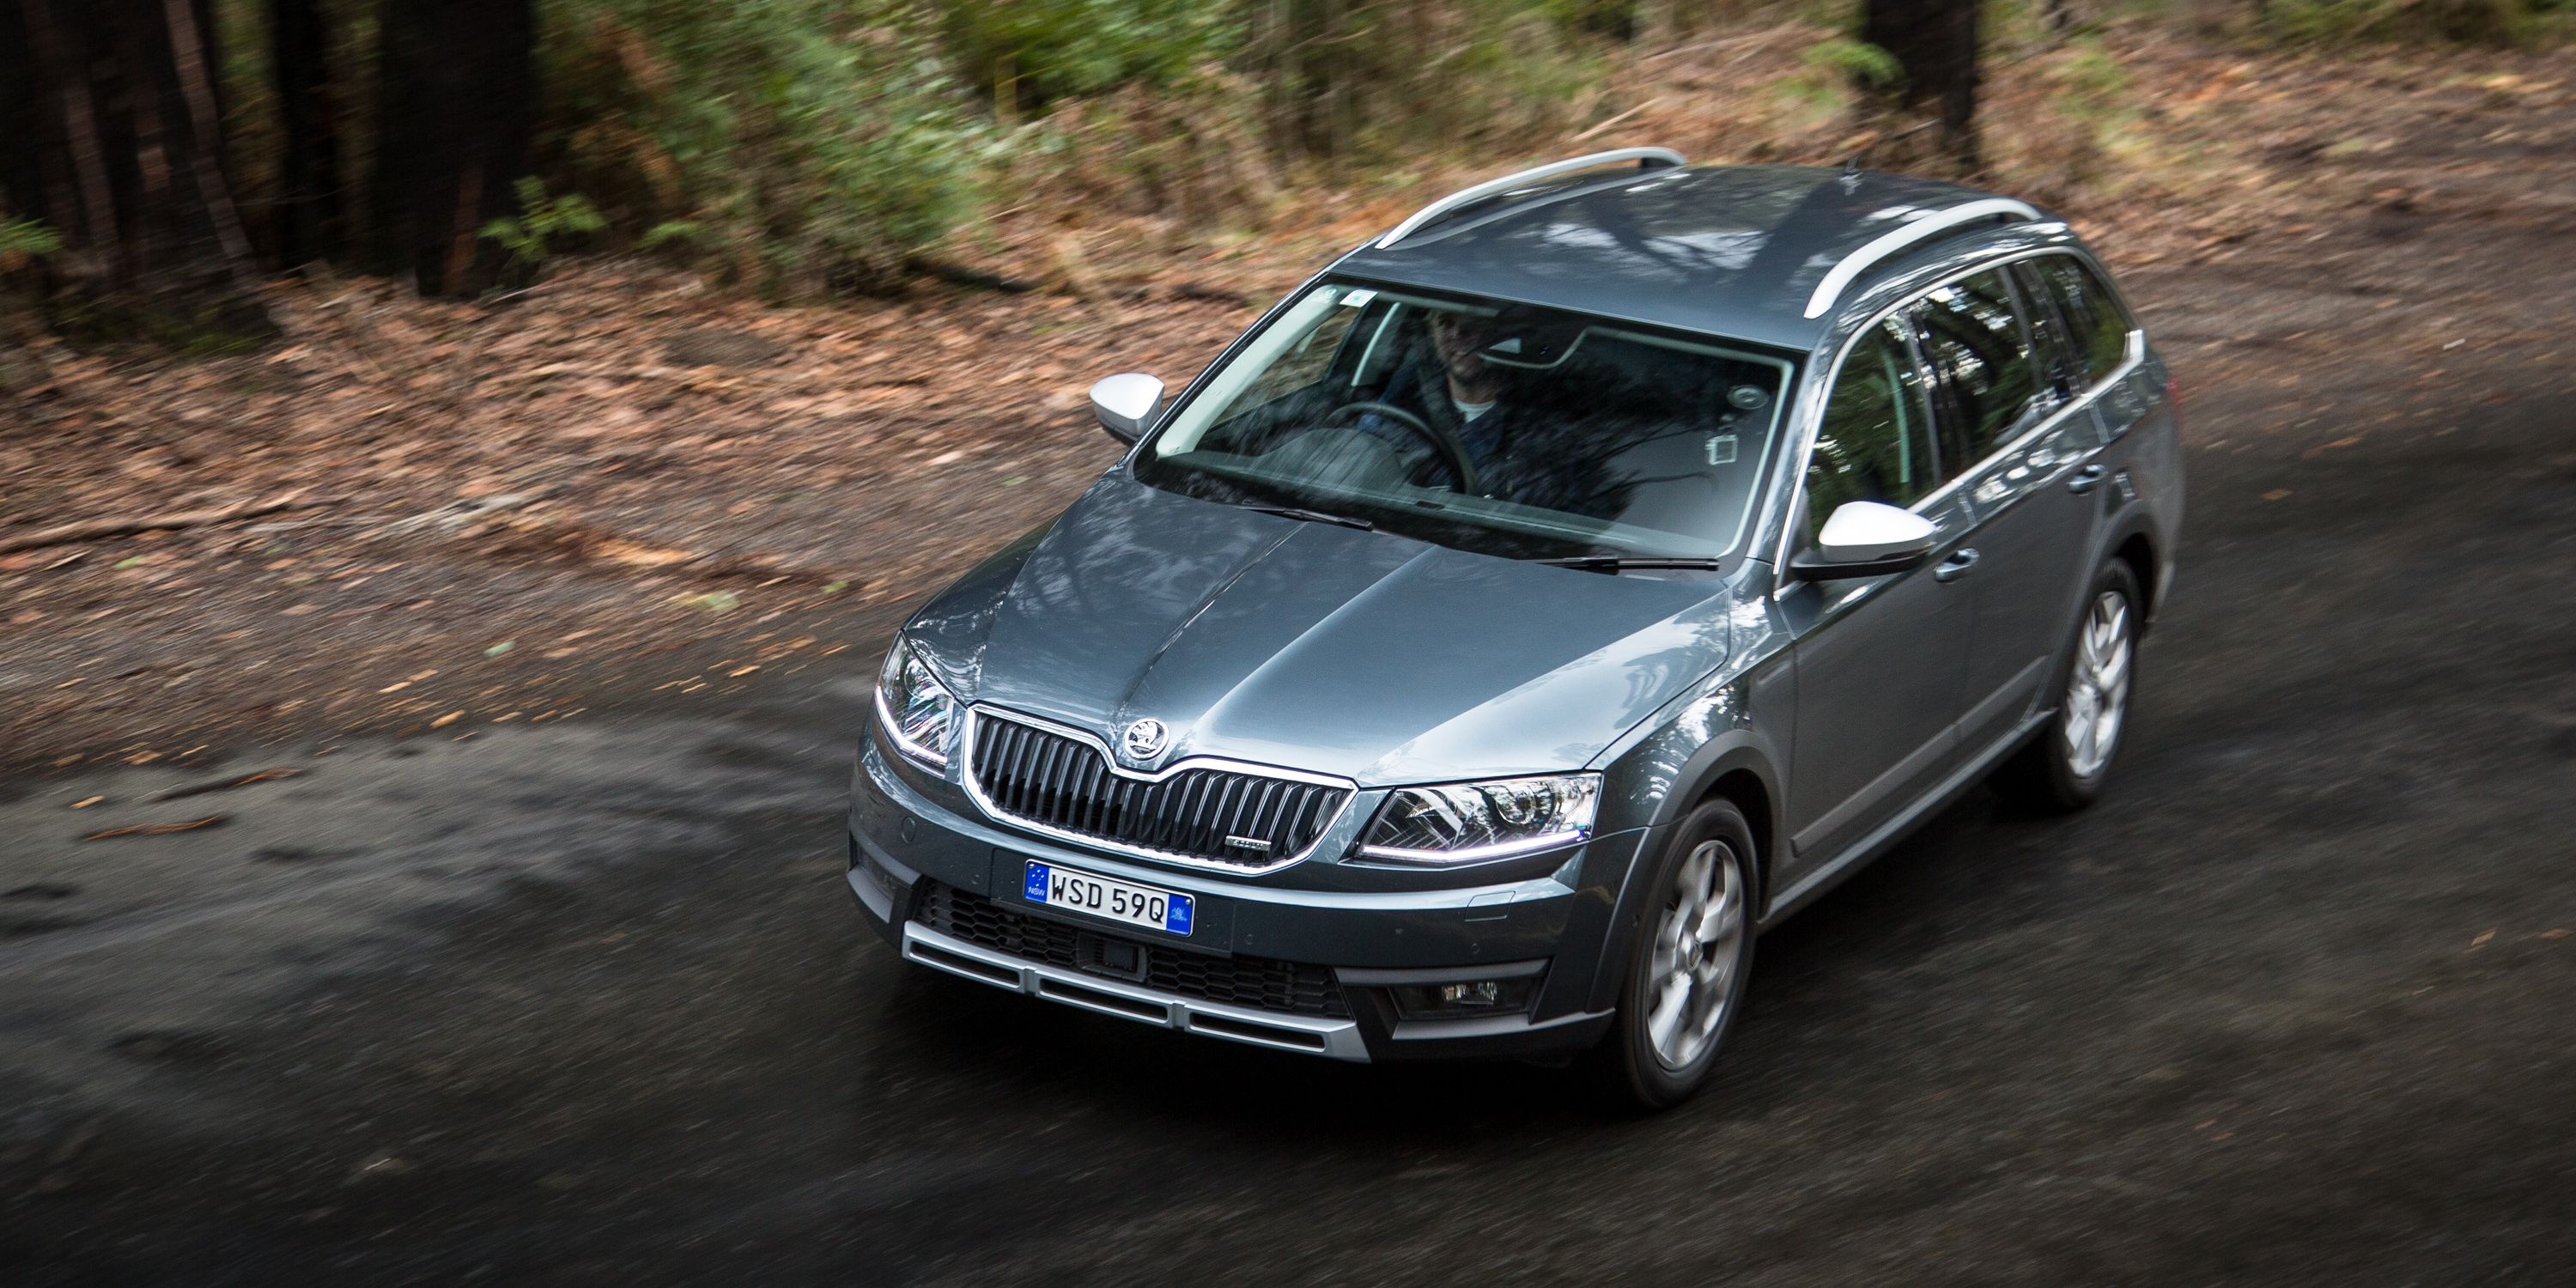 2016 Skoda Octavia Scout Test Drive (View 10 of 23)